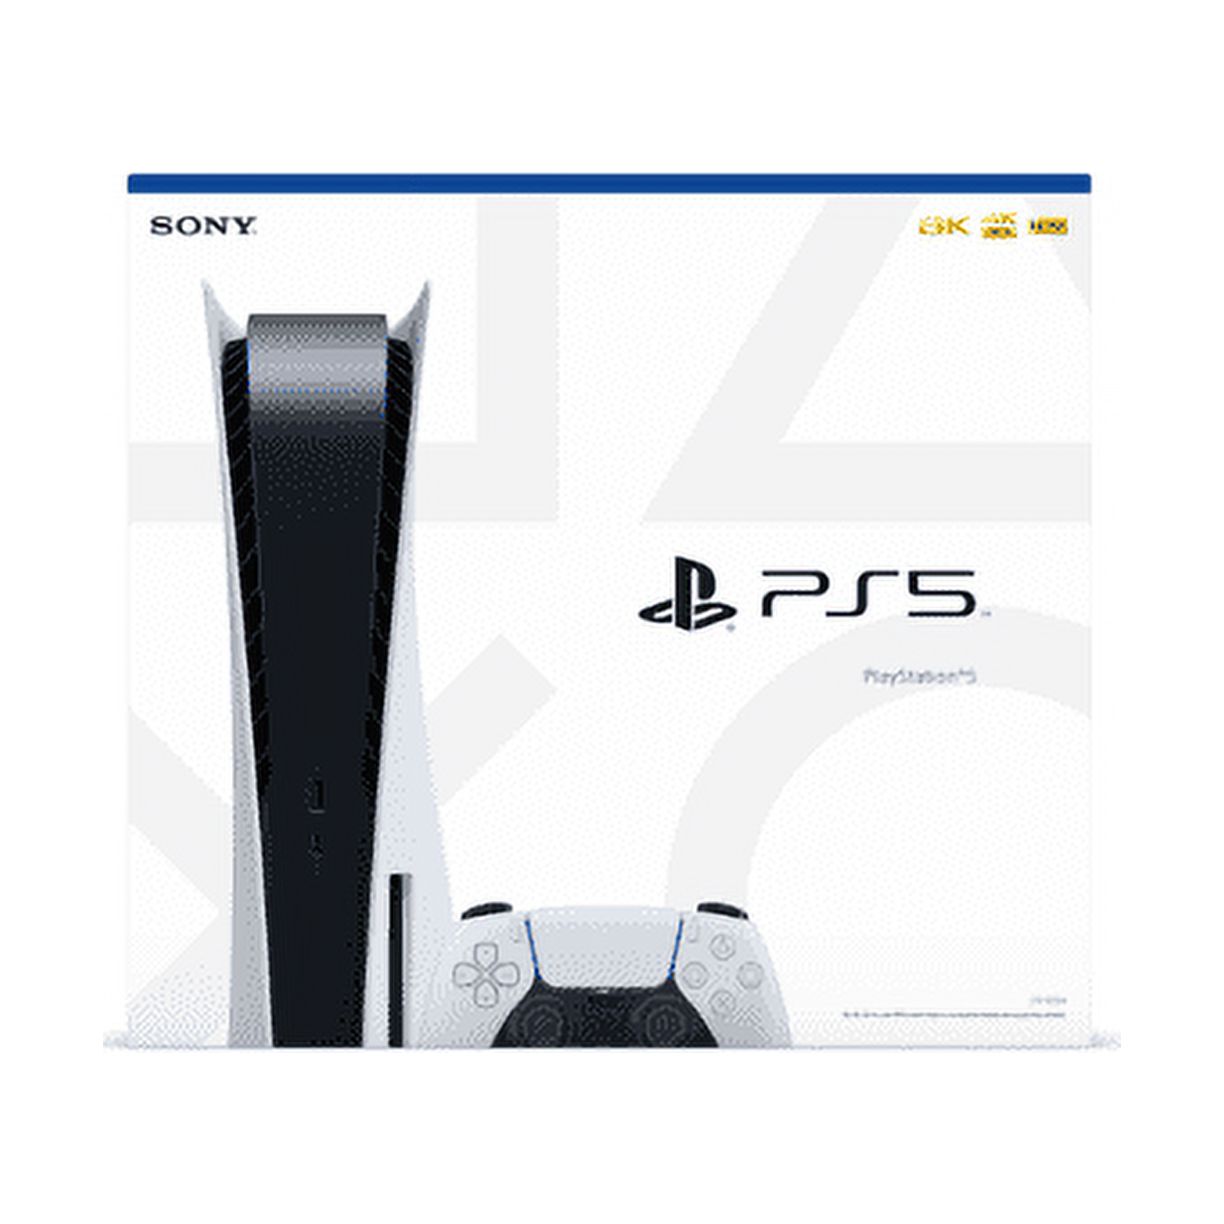 Sony PlayStation 5 Console (PS5 Disc Console) Disk Version Including Two Controller and Controller Case - image 2 of 5